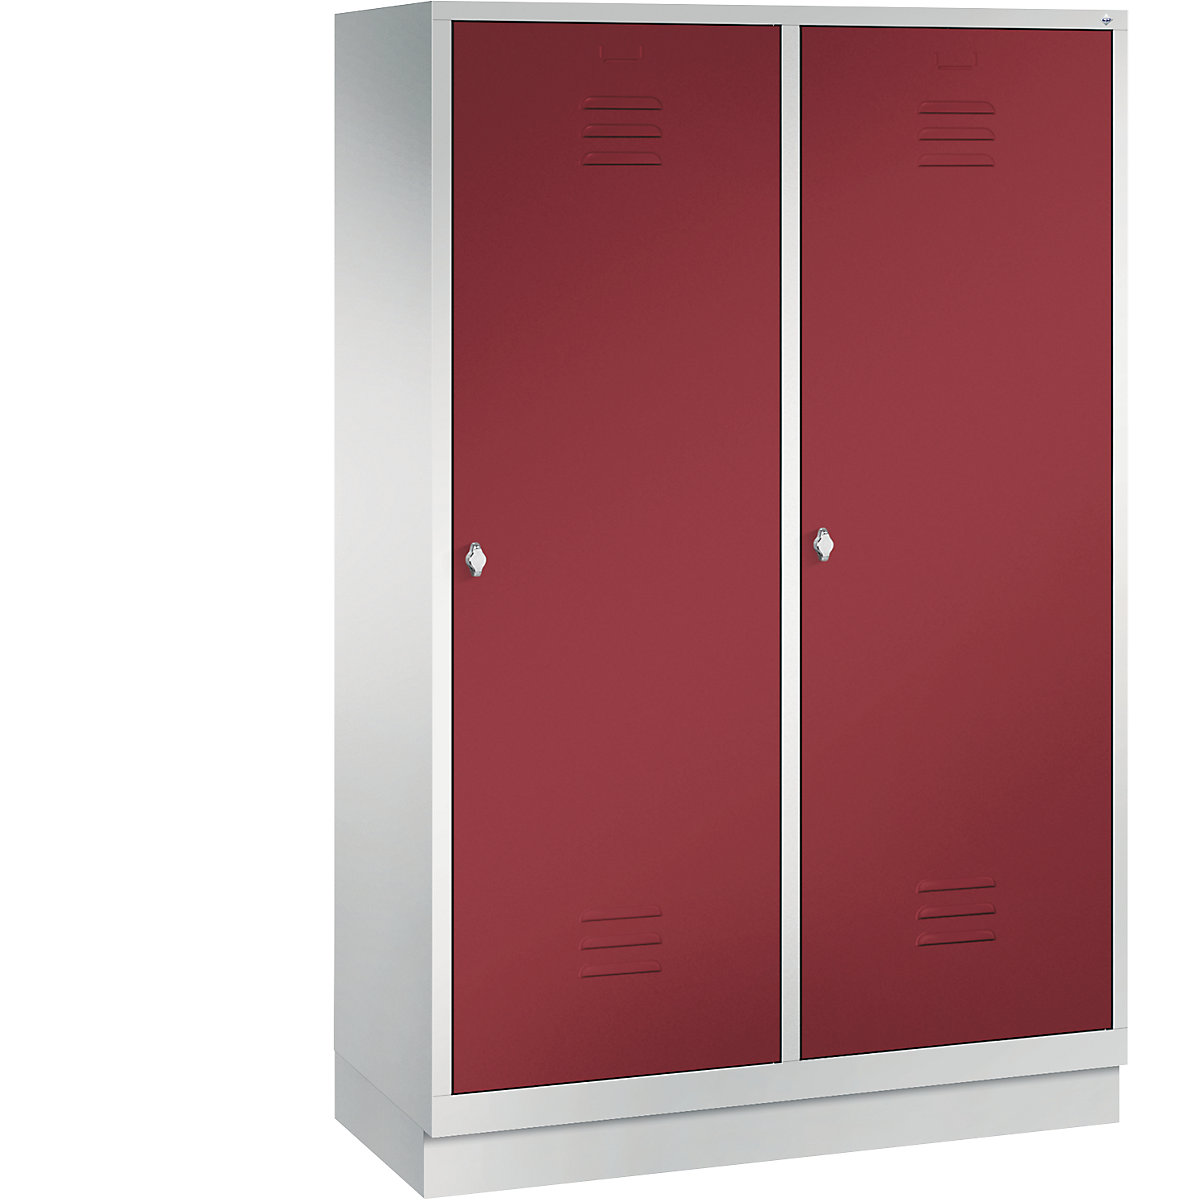 CLASSIC cloakroom locker with plinth, door for 2 compartments – C+P, 4 compartments, compartment width 300 mm, light grey / ruby red-8